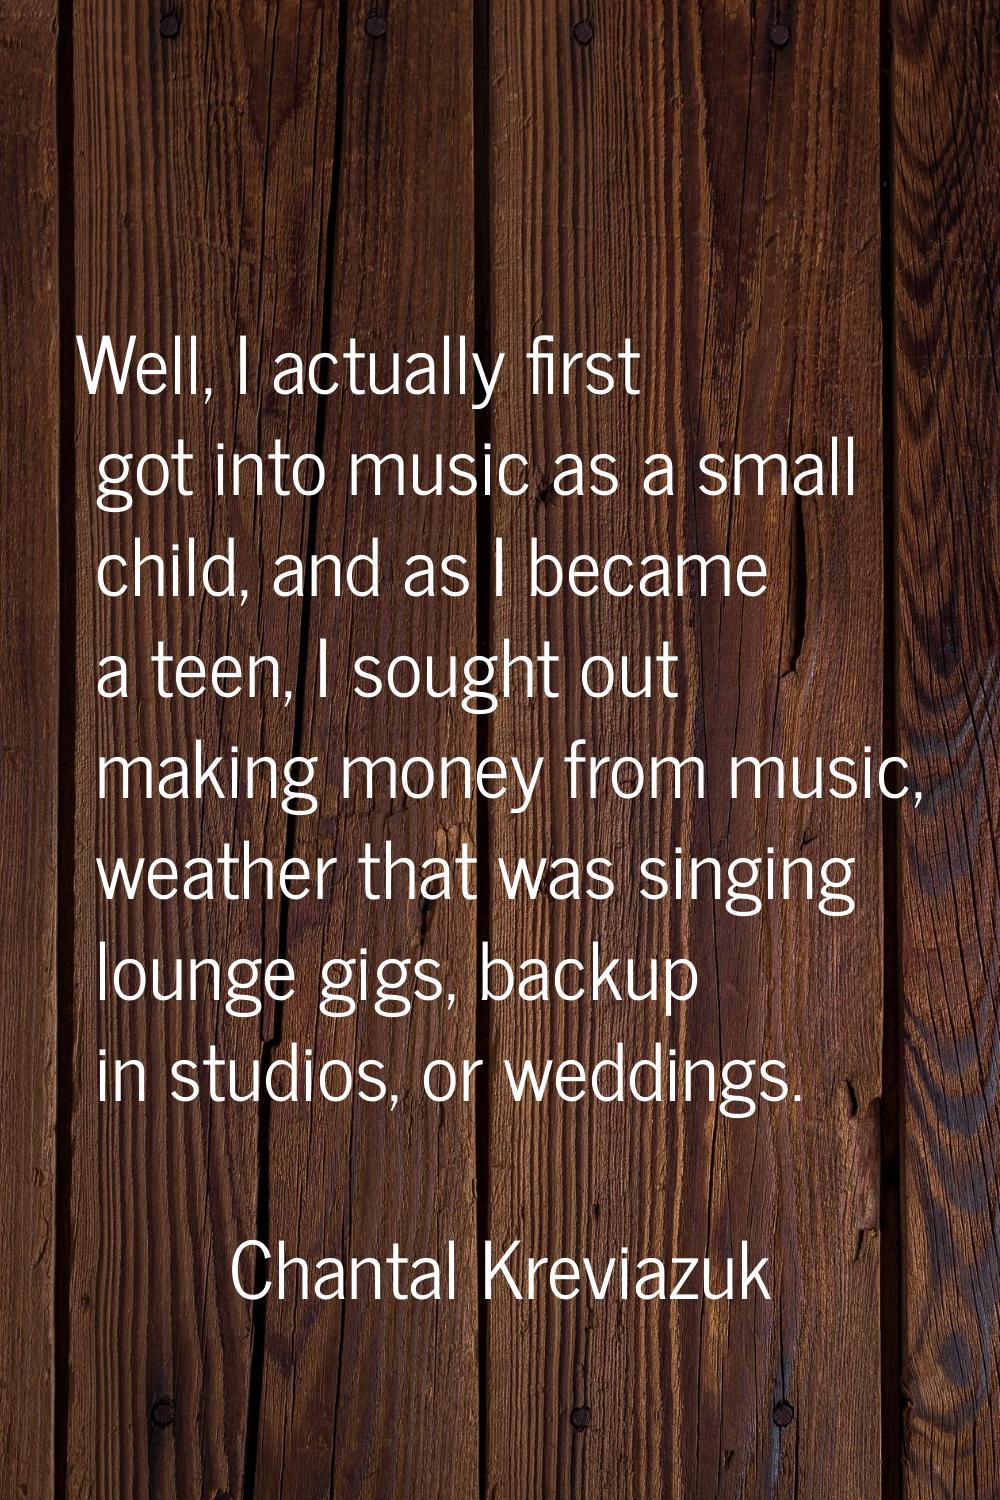 Well, I actually first got into music as a small child, and as I became a teen, I sought out making